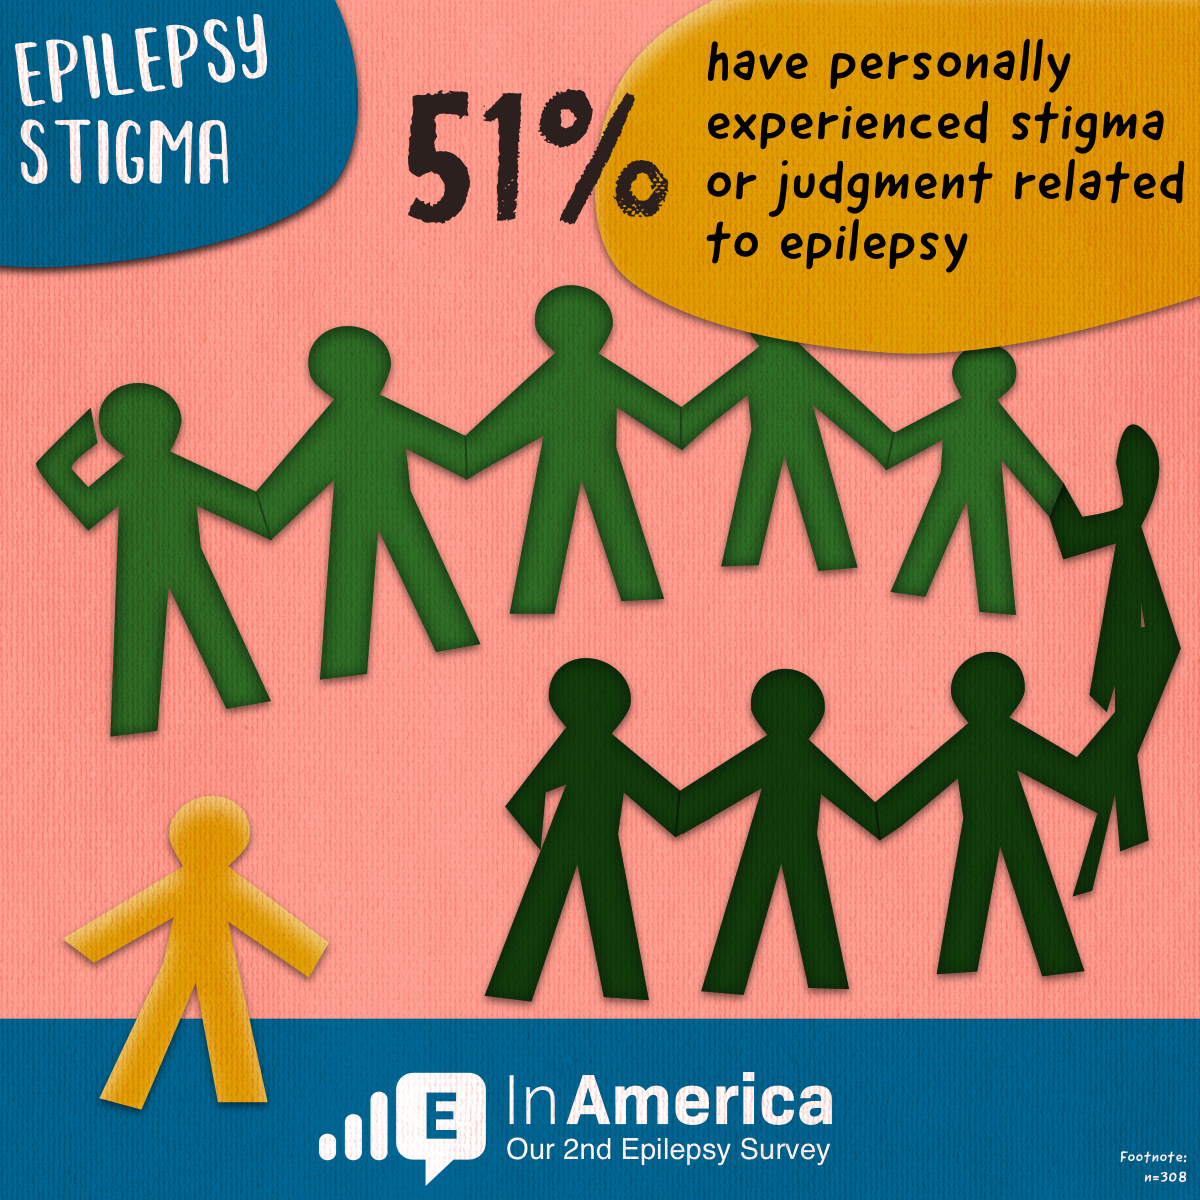 51% have personally stigma or judgment related to epilepsy